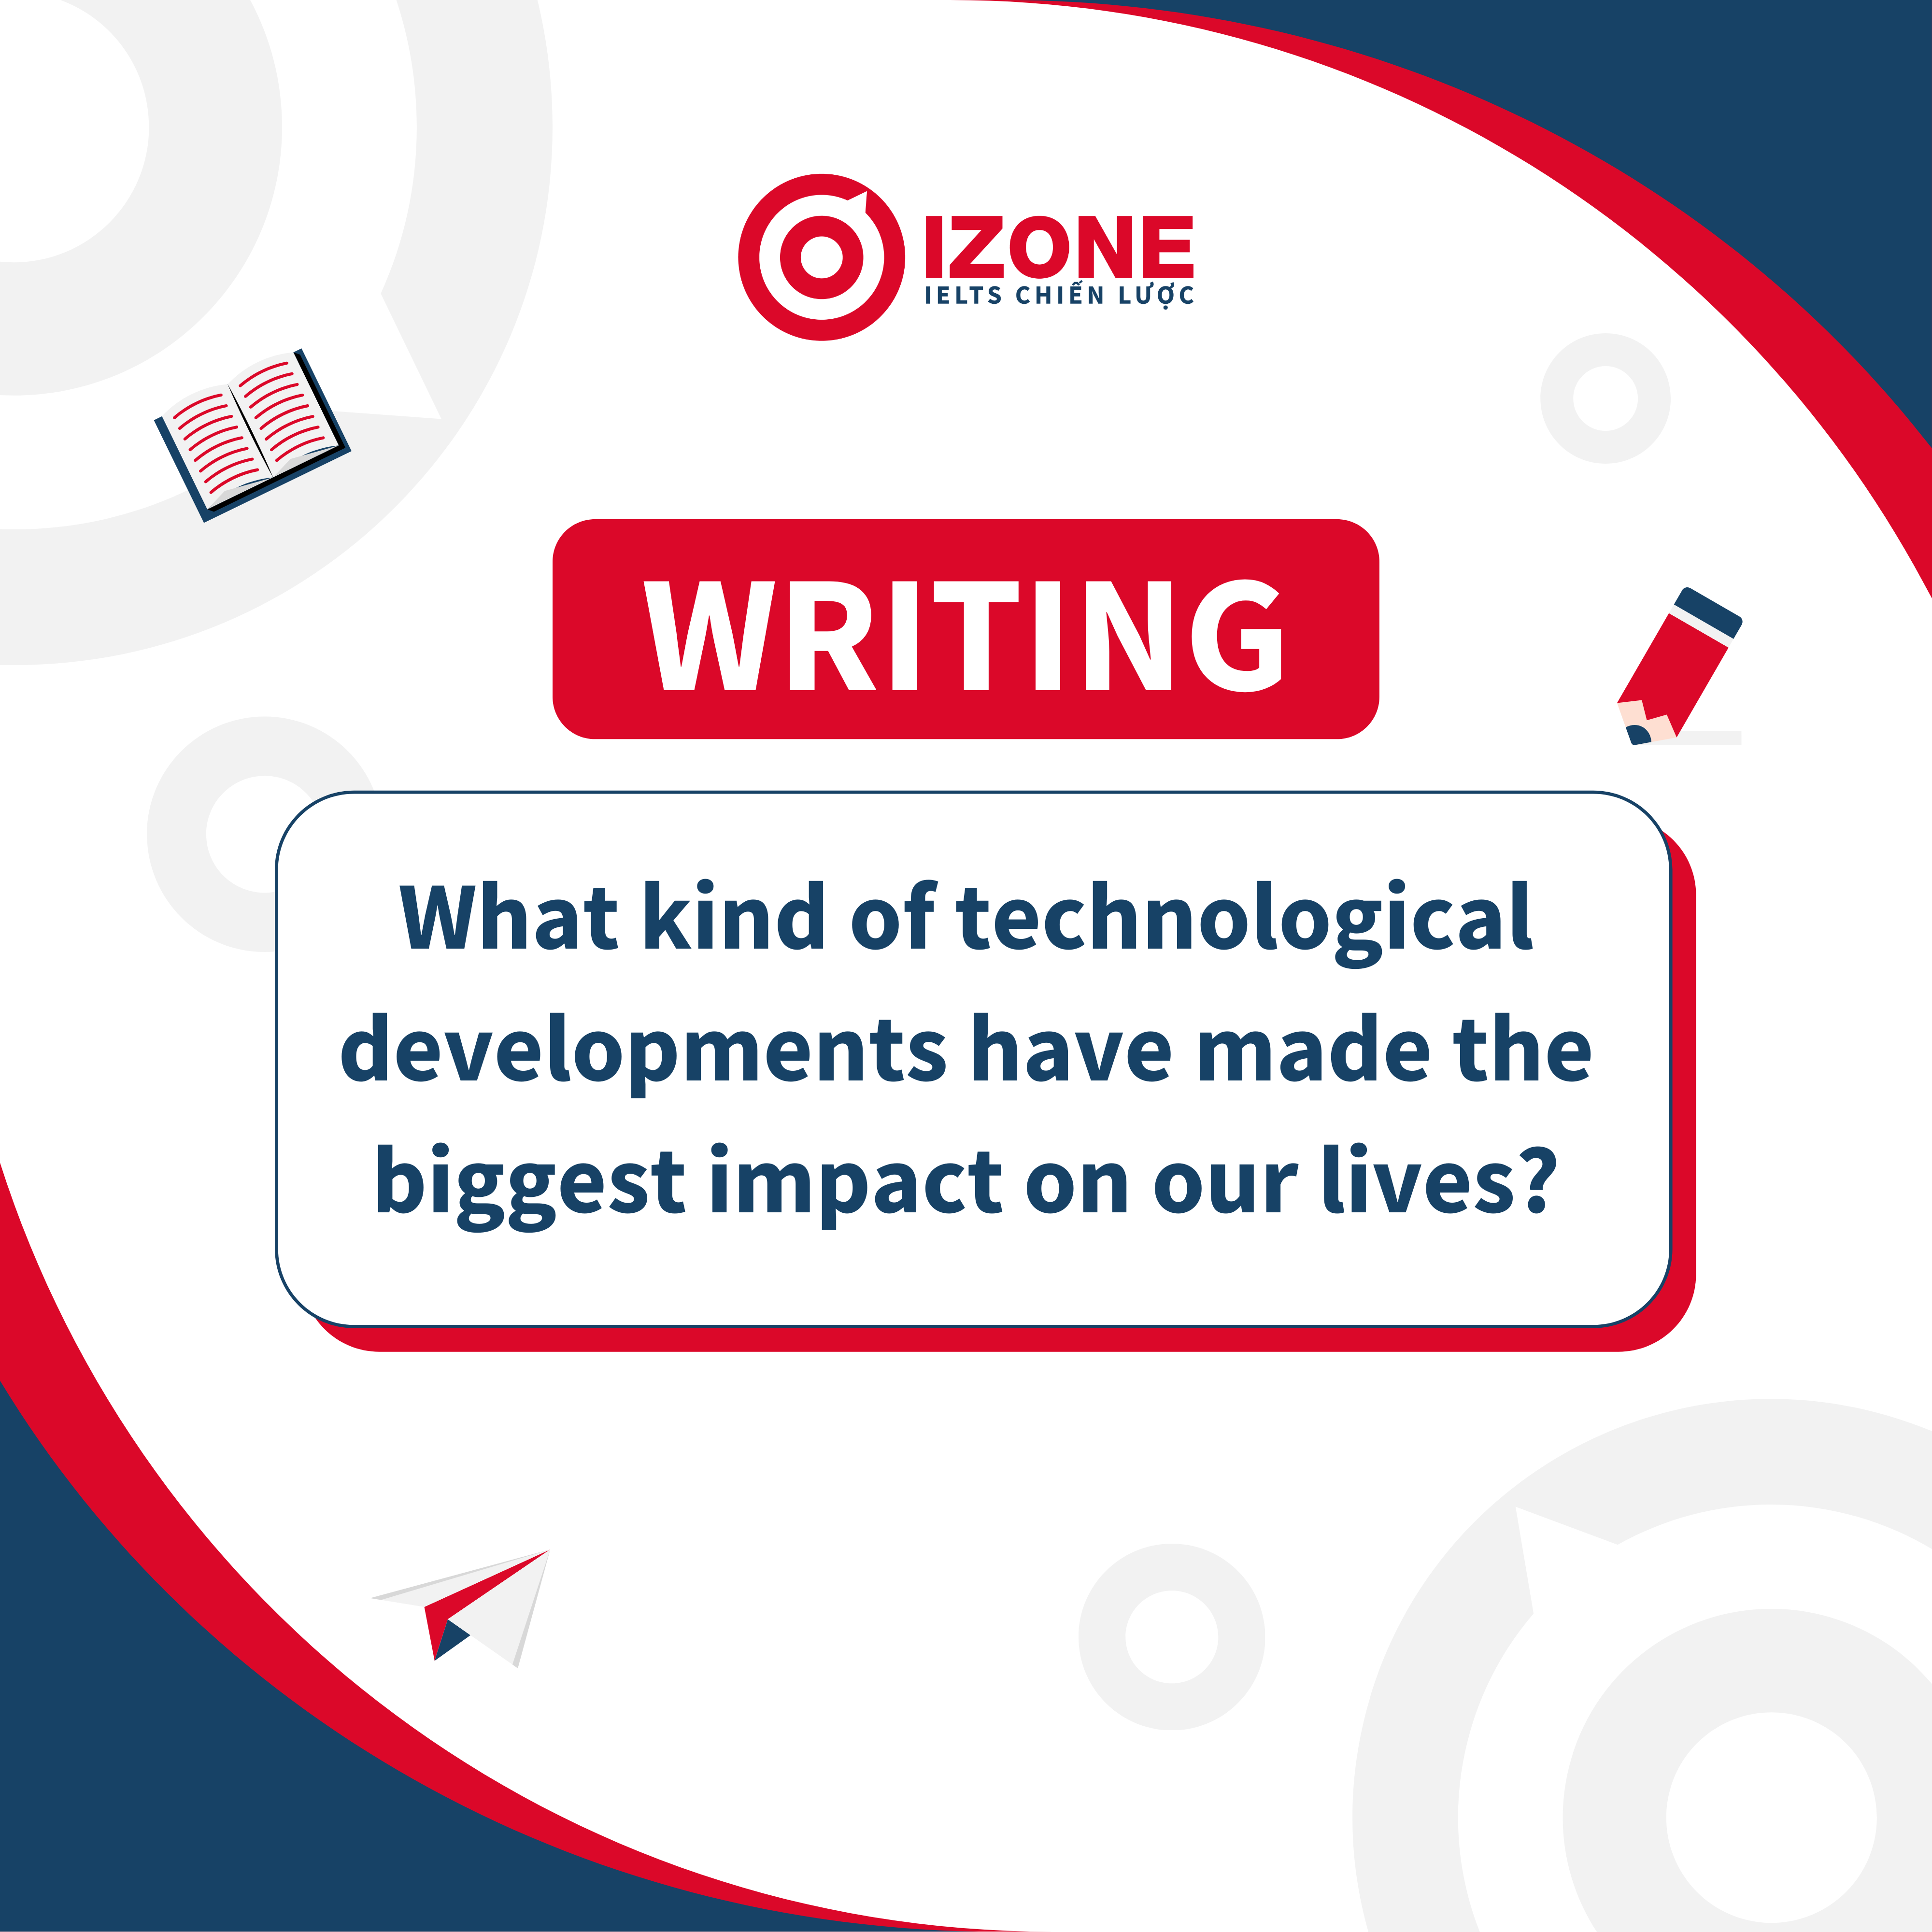 Cách Triển Khai Câu Hỏi “What kind of technological developments have made the biggest impact on our lives?”